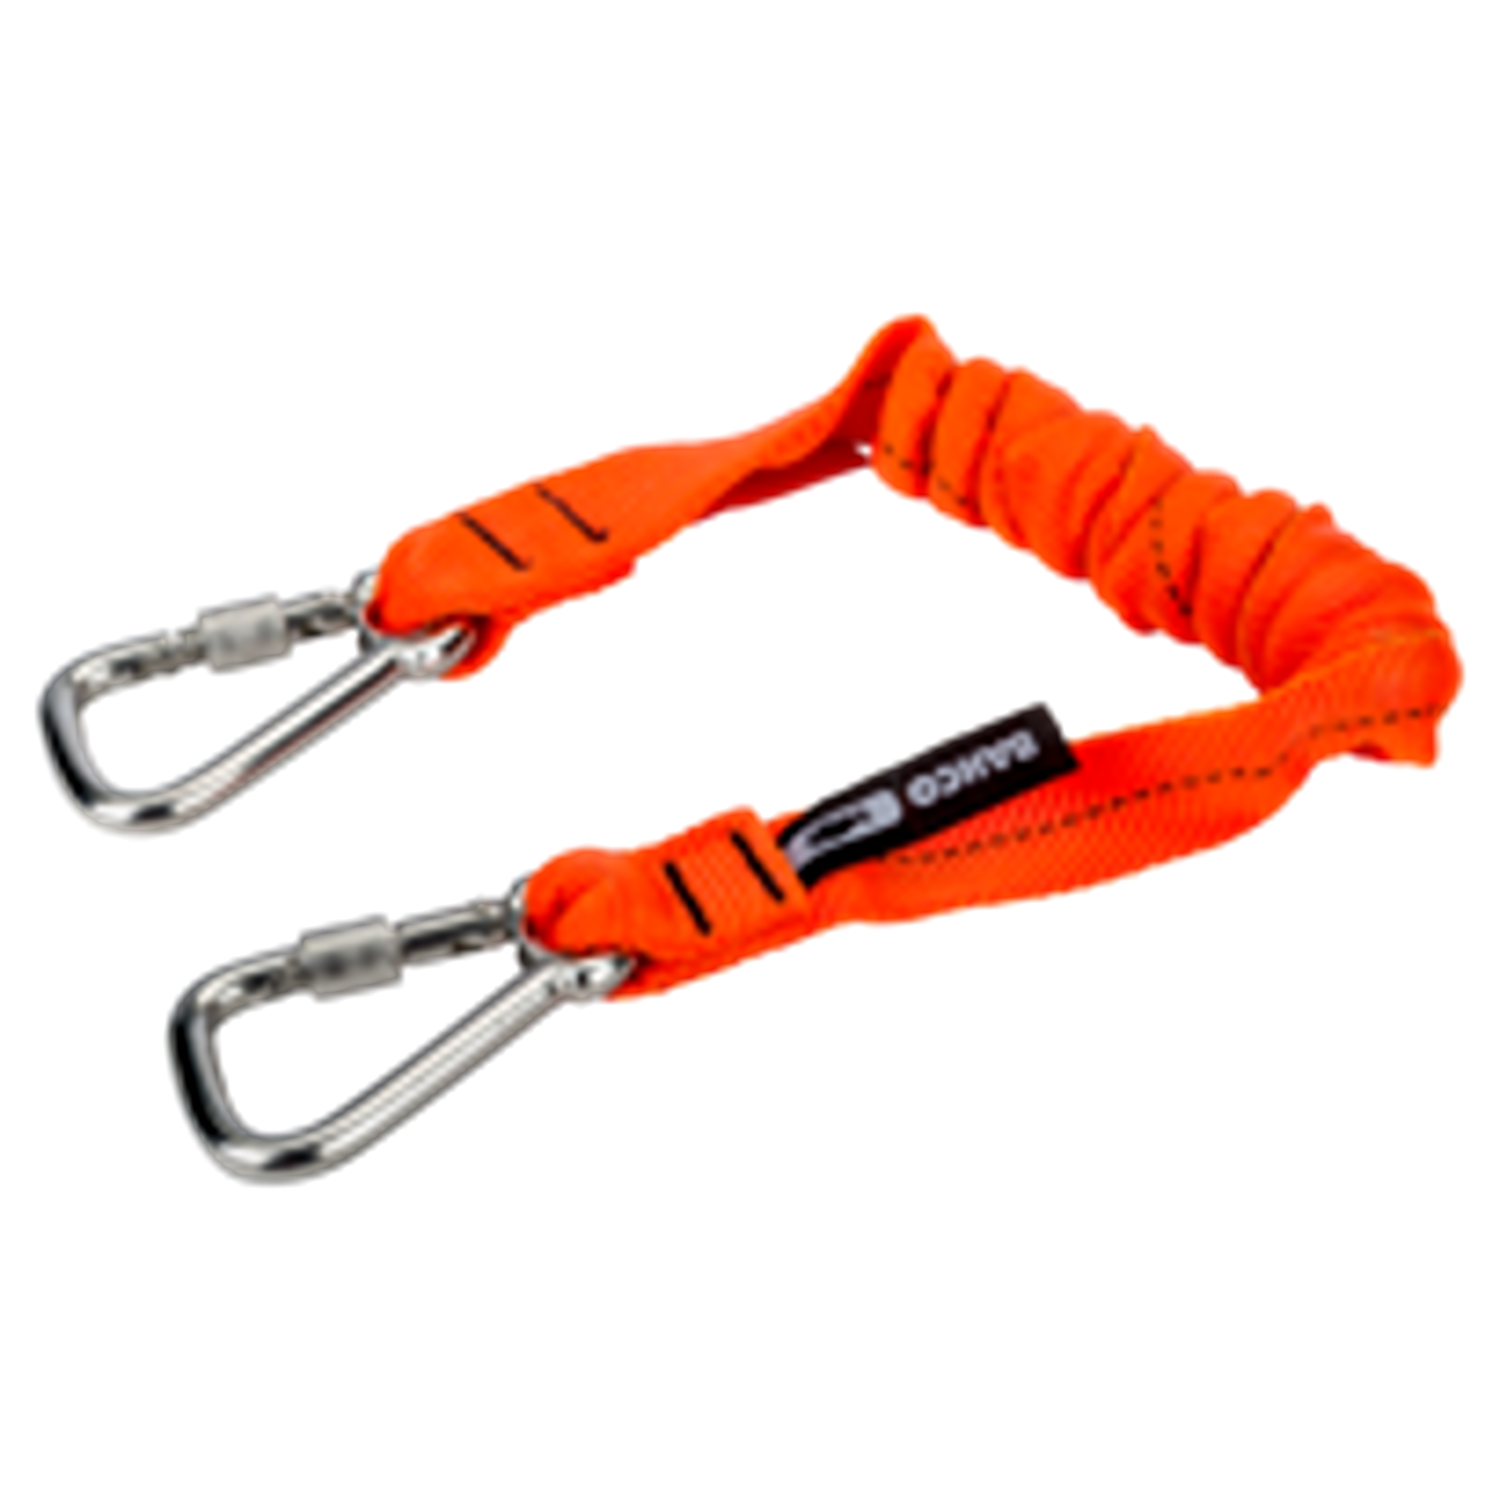 BAHCO 3875-LY10 Strap Lanyard with Fixed Carabiner 12 kg - Premium Lanyard from BAHCO - Shop now at Yew Aik.